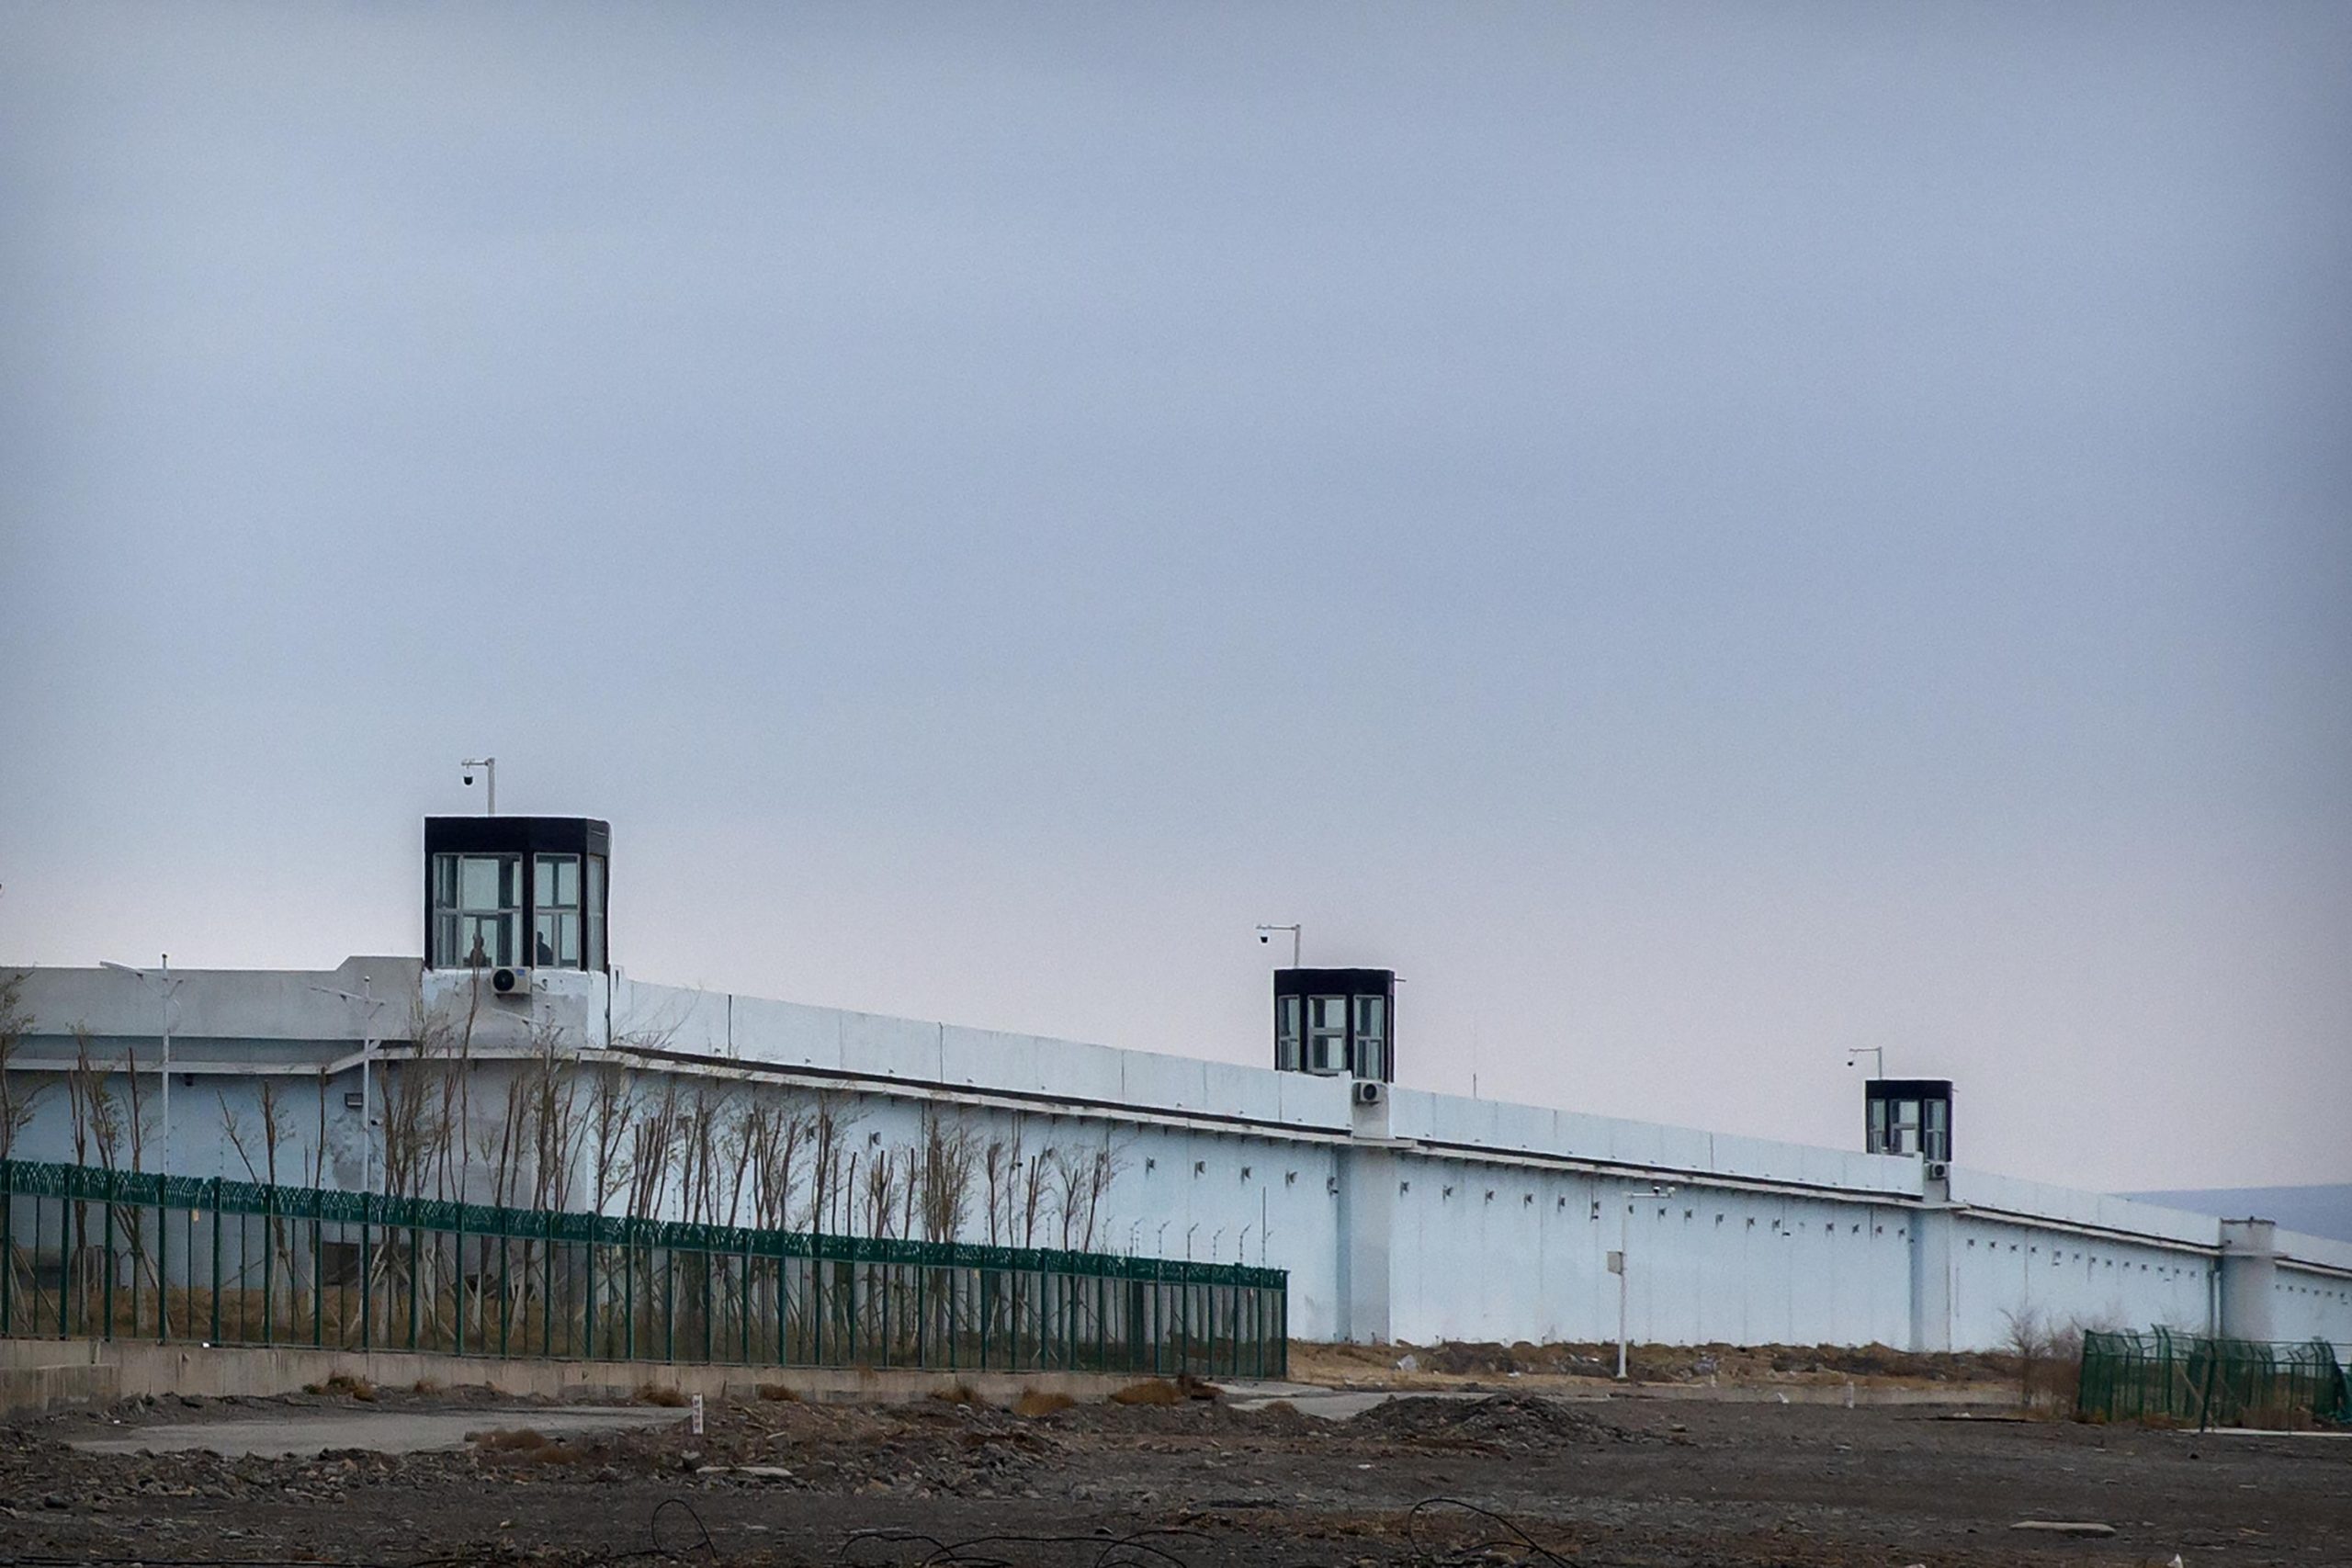 Room for 10,000: Inside China’s largest detention center